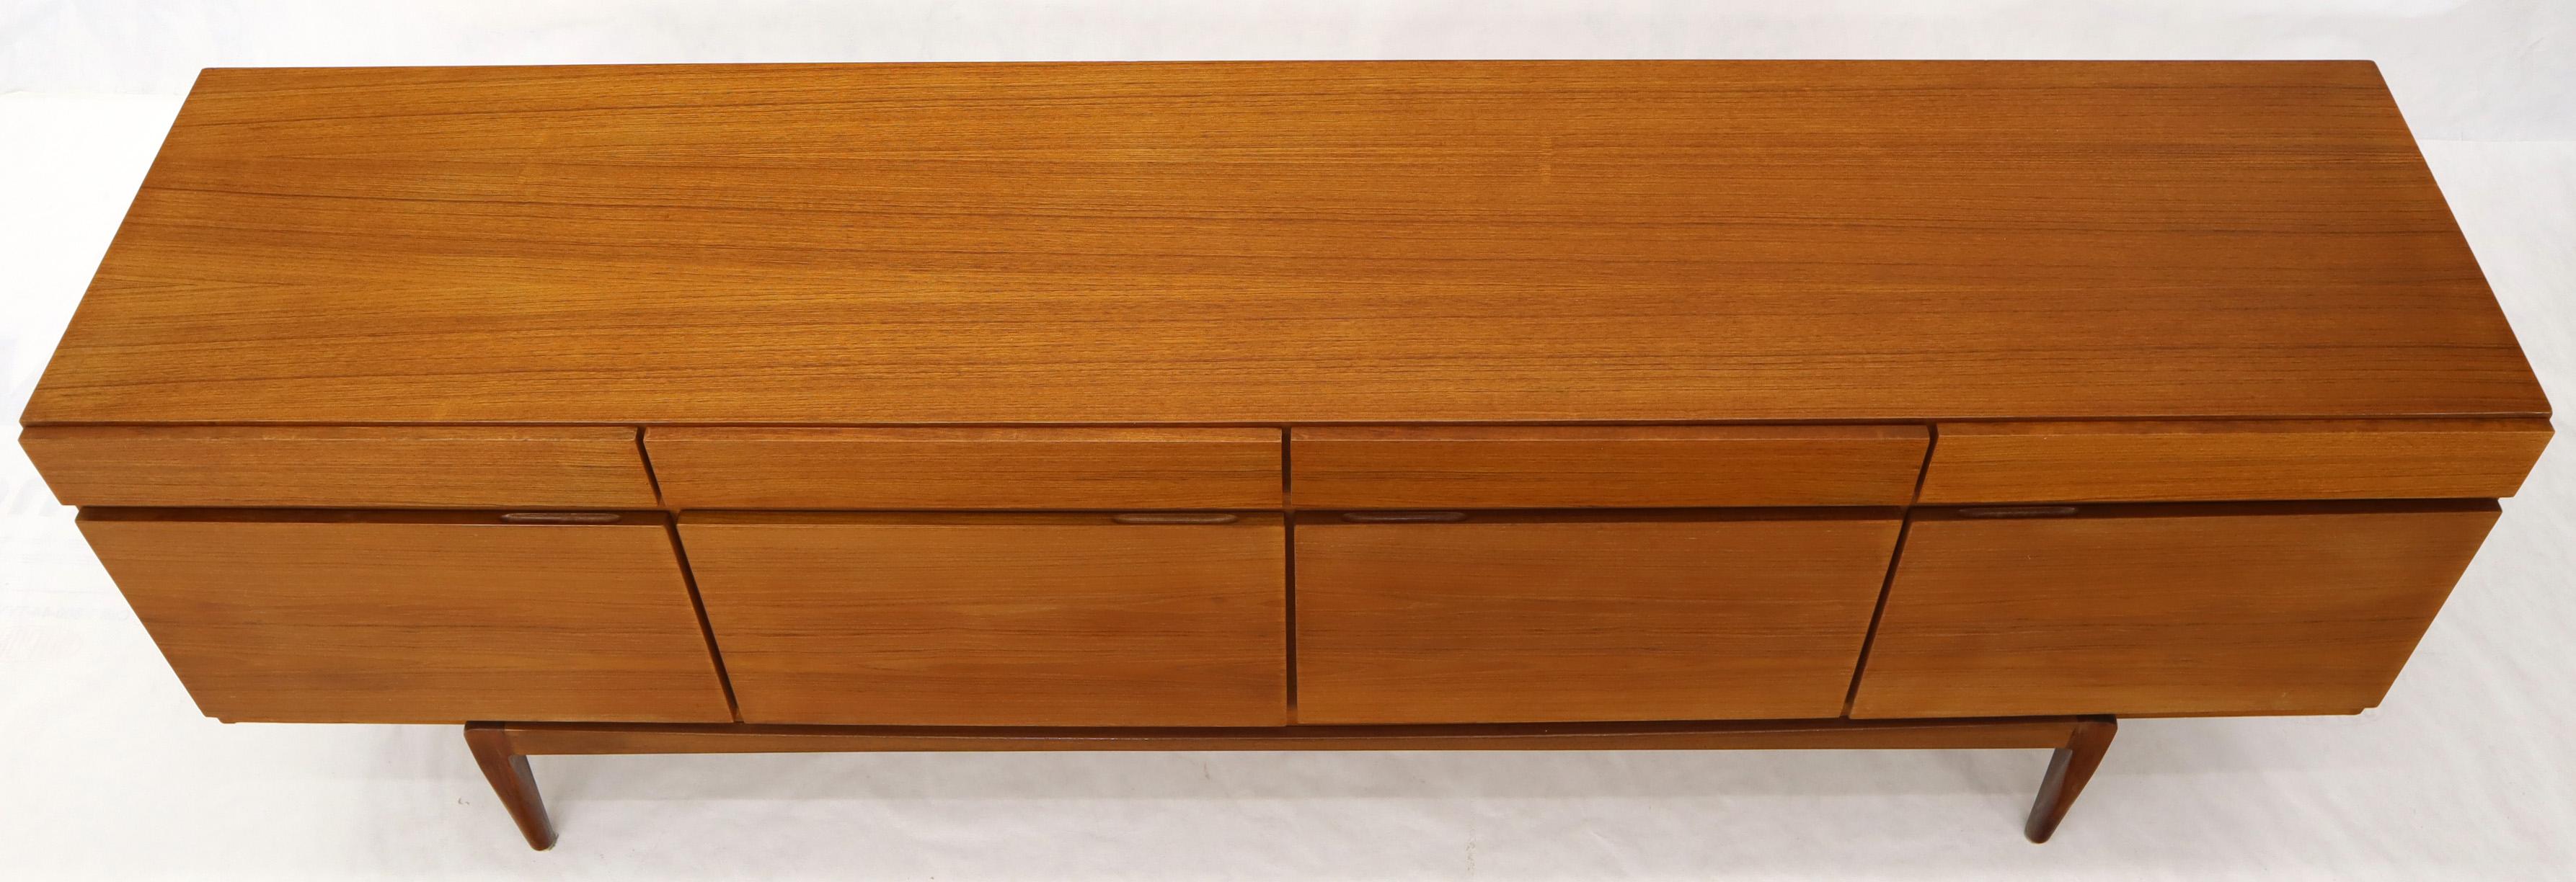 Lacquered Long Low Danish Mid-Century Modern Credenza Four Doors and Drawers Compartments 